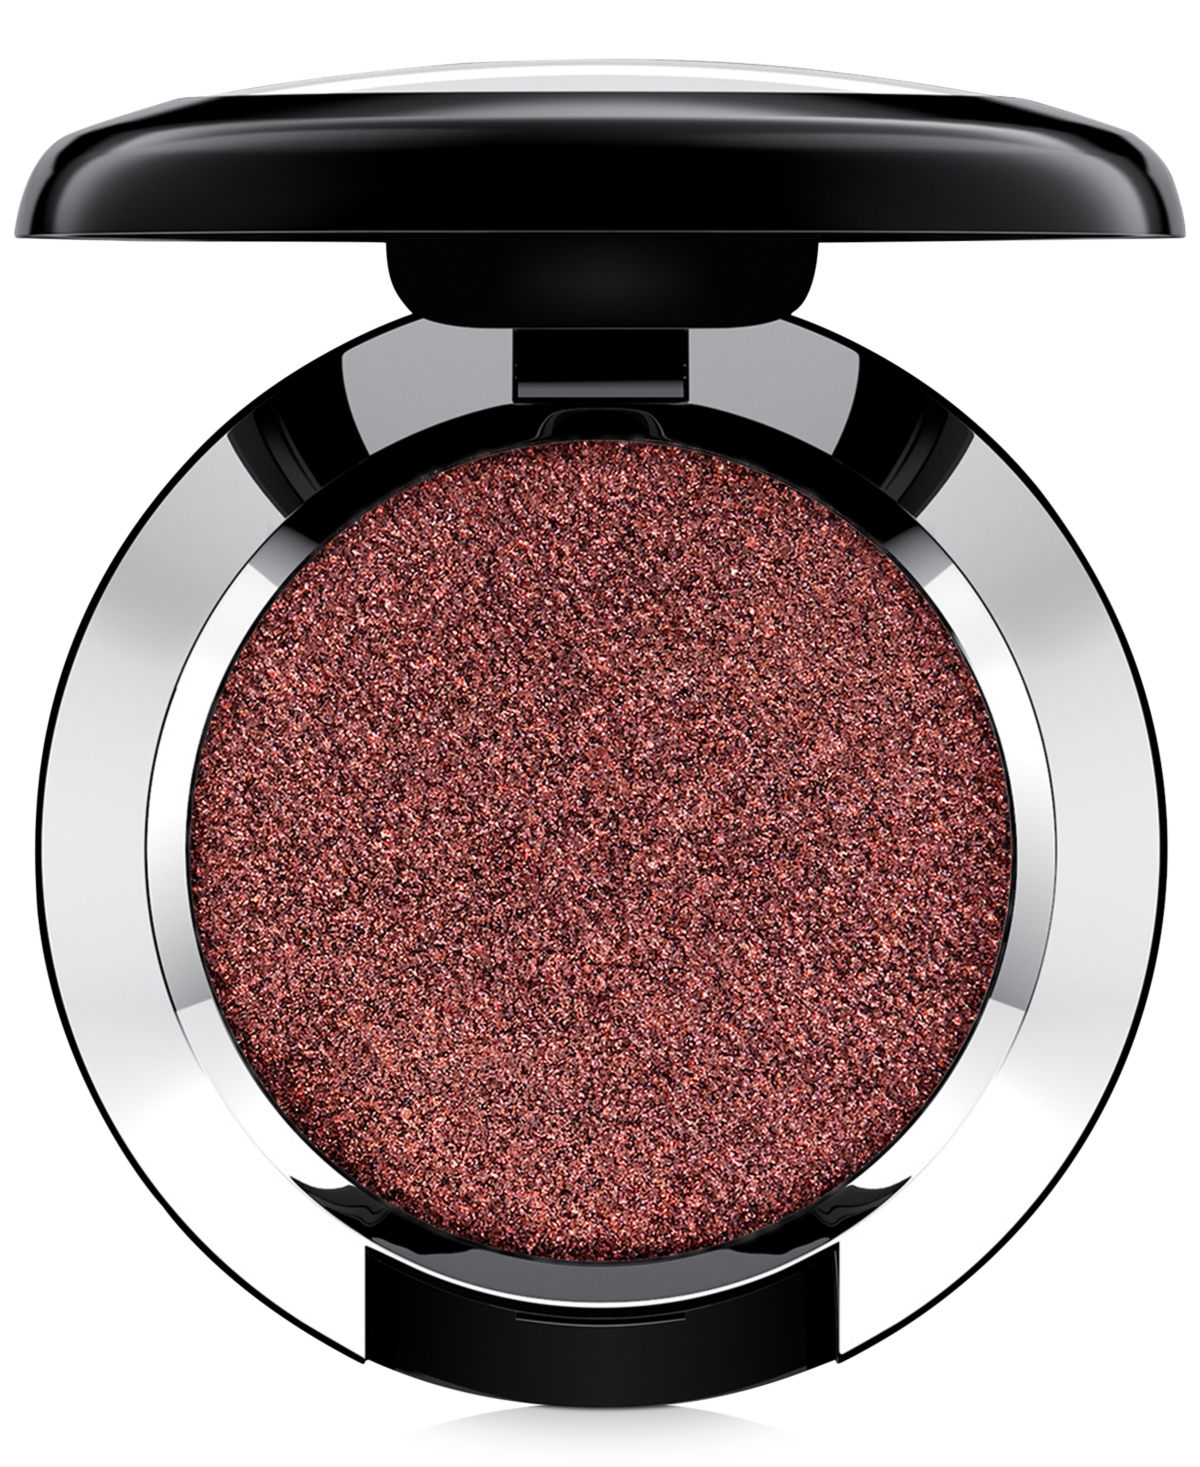 Mac Dazzleshadow Extreme In Incinerated